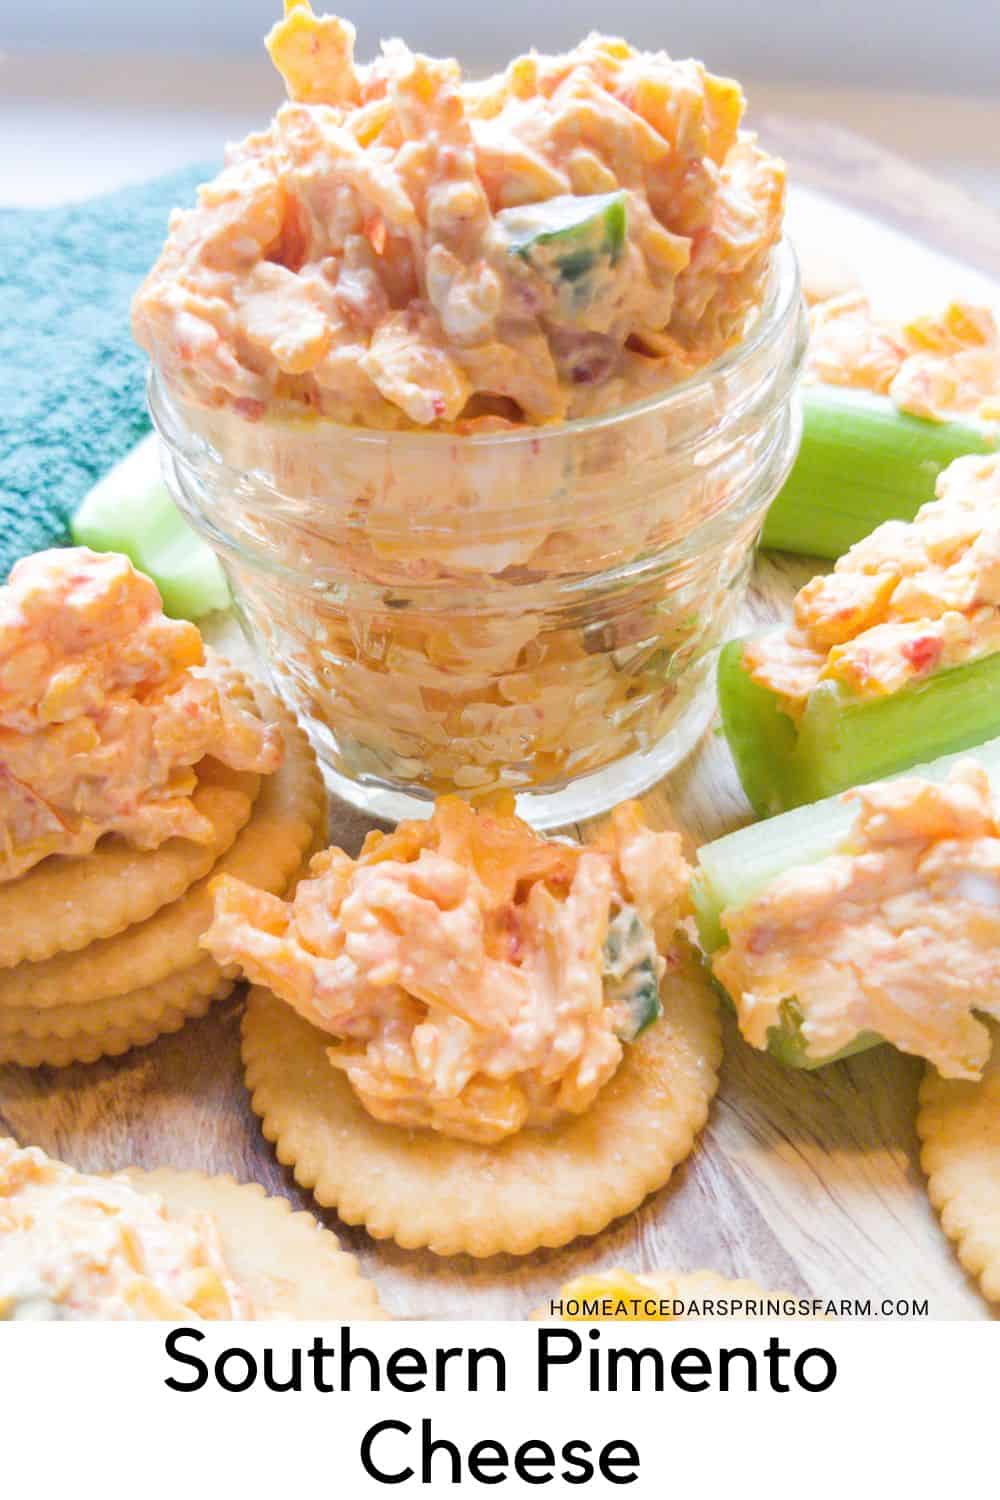 Southern Pimento Cheese in a dish with crackers and celery with text overlay.